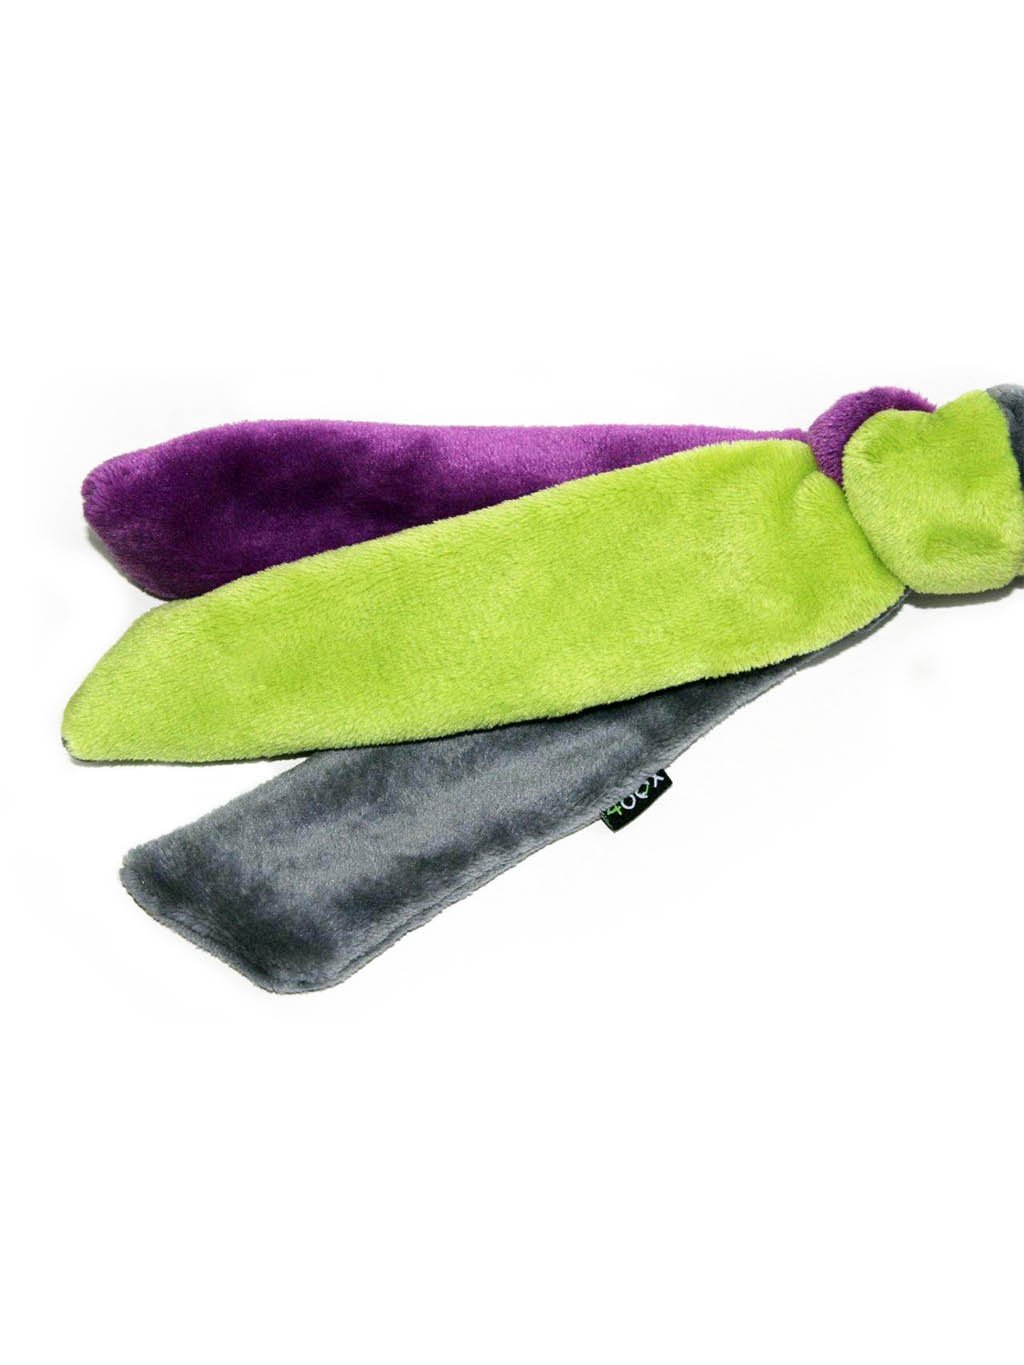 Knitted tug toy - lime/purple